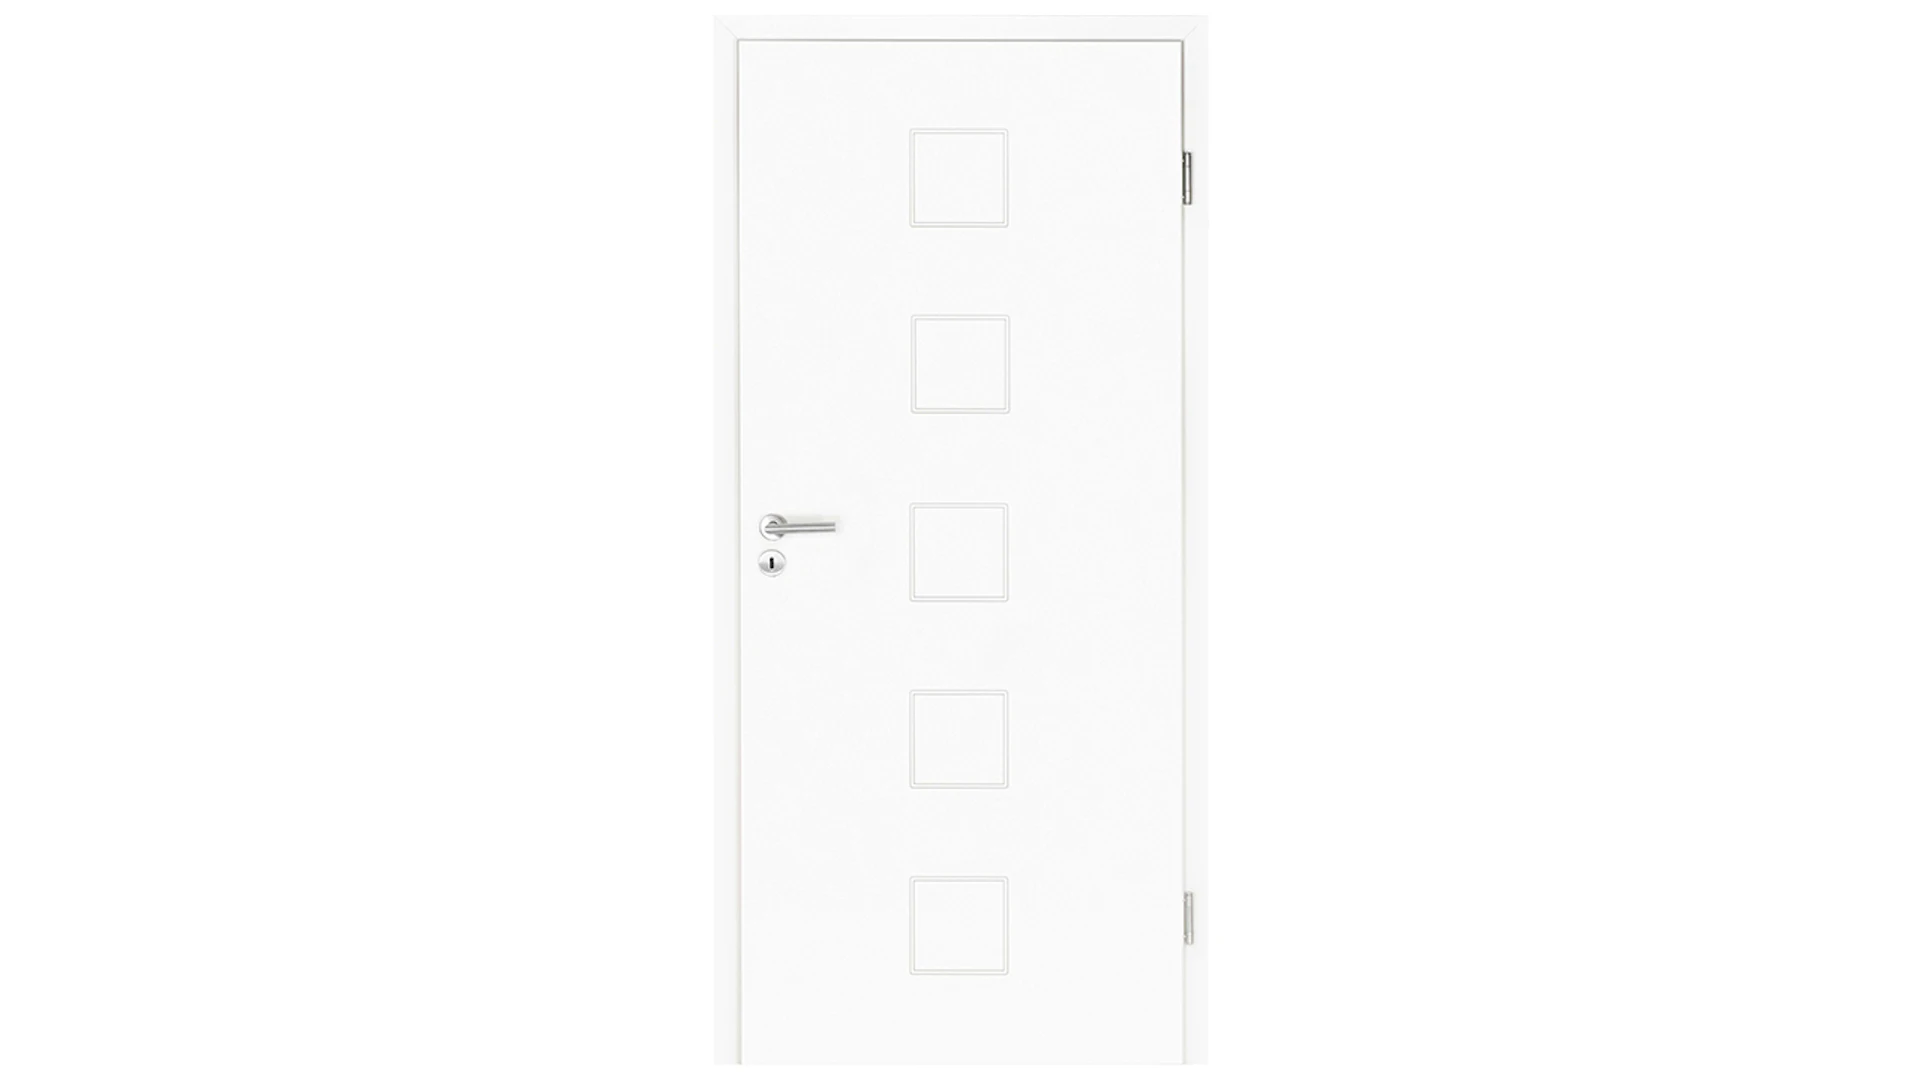 planeo interior door lacquer 2.0 - Keno 9010 white lacquer 1985 x 985 mm DIN R - round RSP hinge 3-t